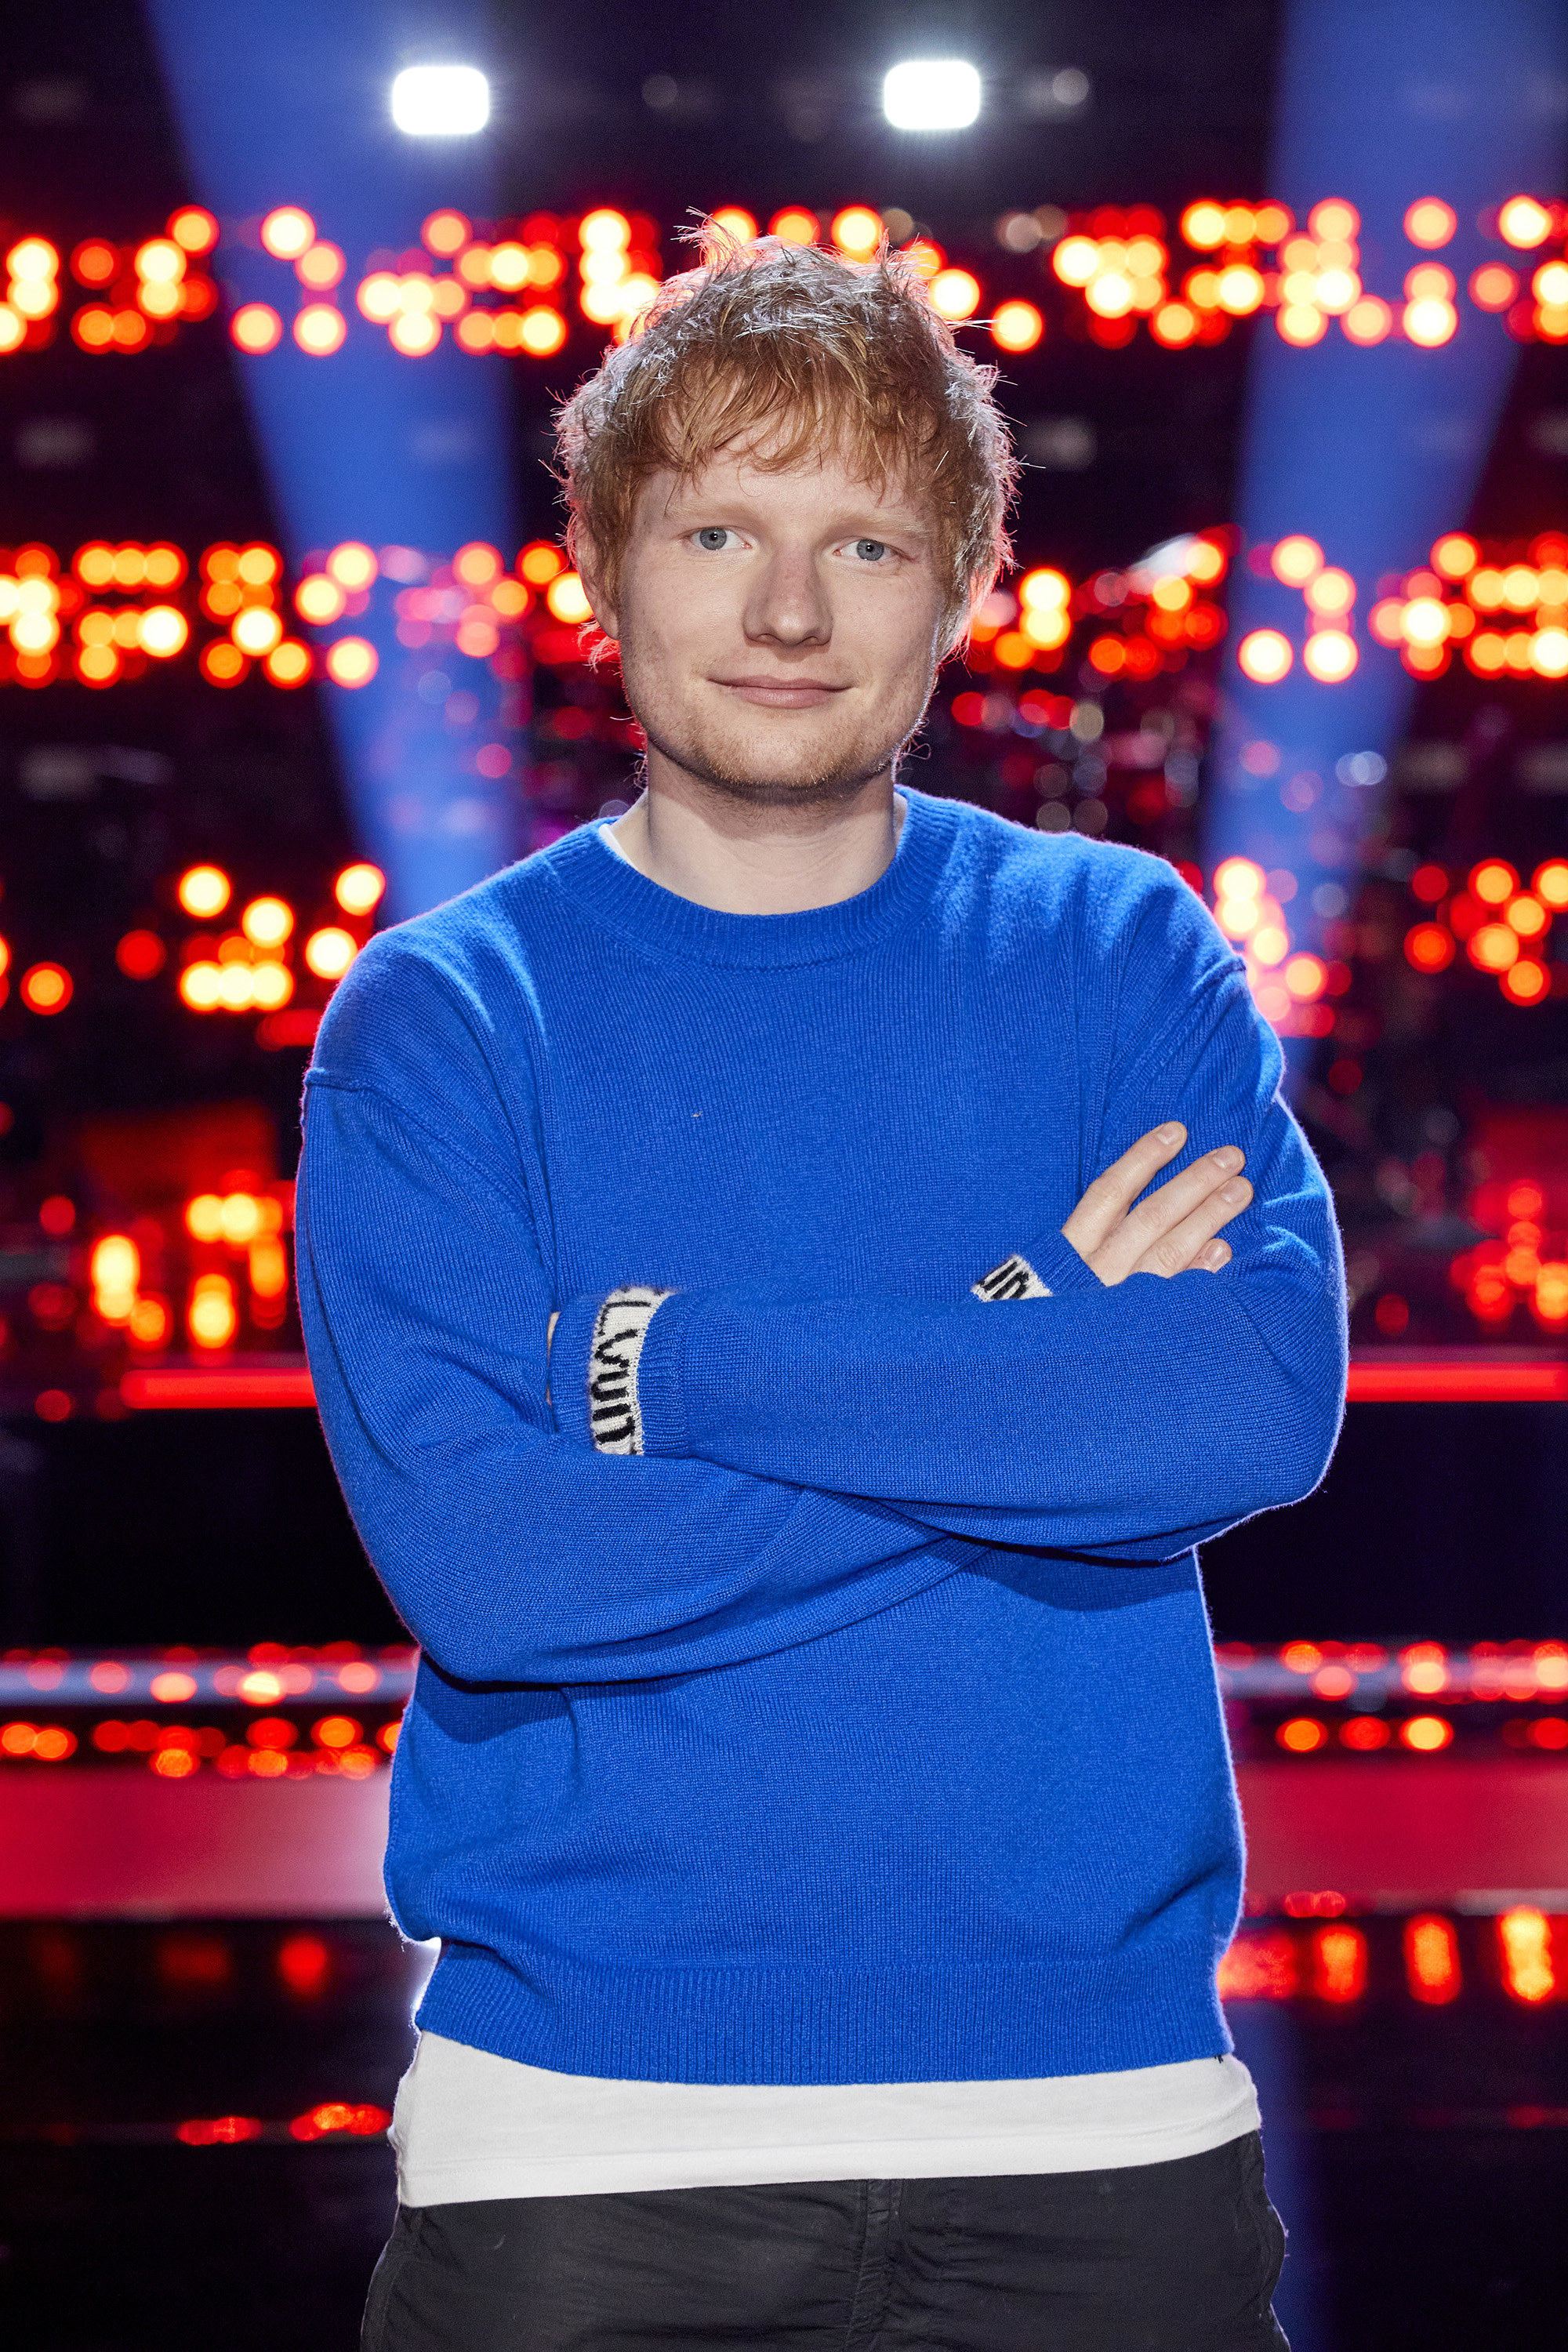 Sheeran stands while facing a camera with his arms crossed